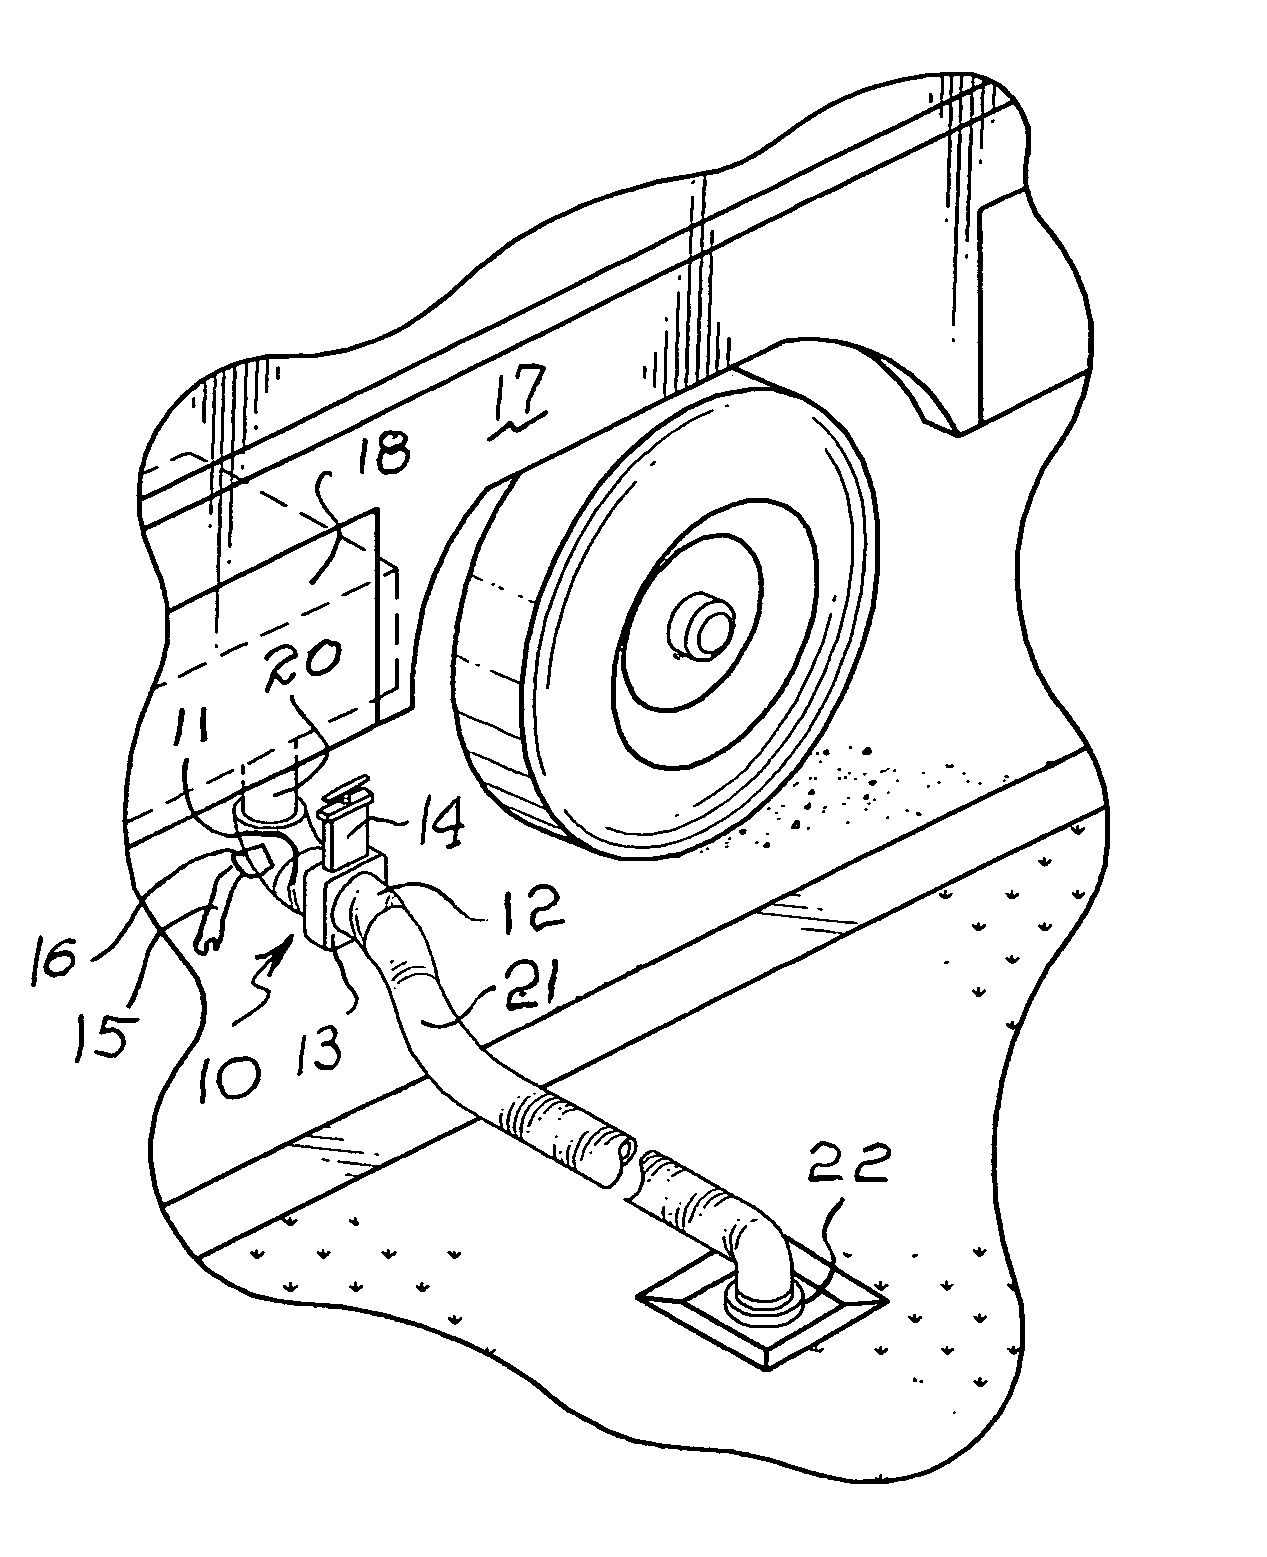 Flush valve and drain system for recreational vehicles